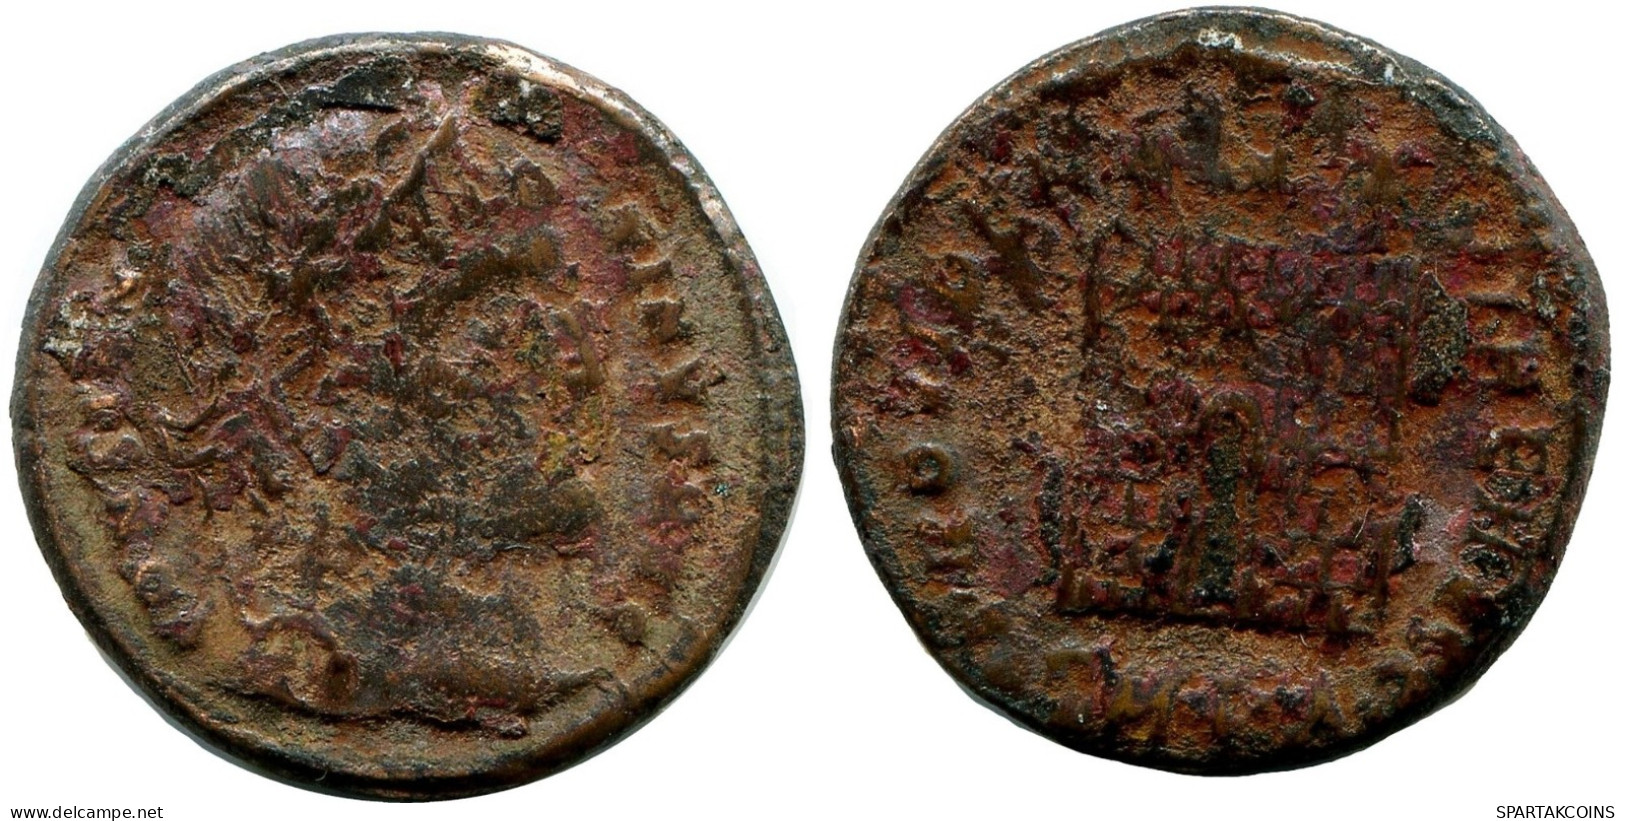 CONSTANTINE I MINTED IN CYZICUS FROM THE ROYAL ONTARIO MUSEUM #ANC11027.14.U.A - El Imperio Christiano (307 / 363)